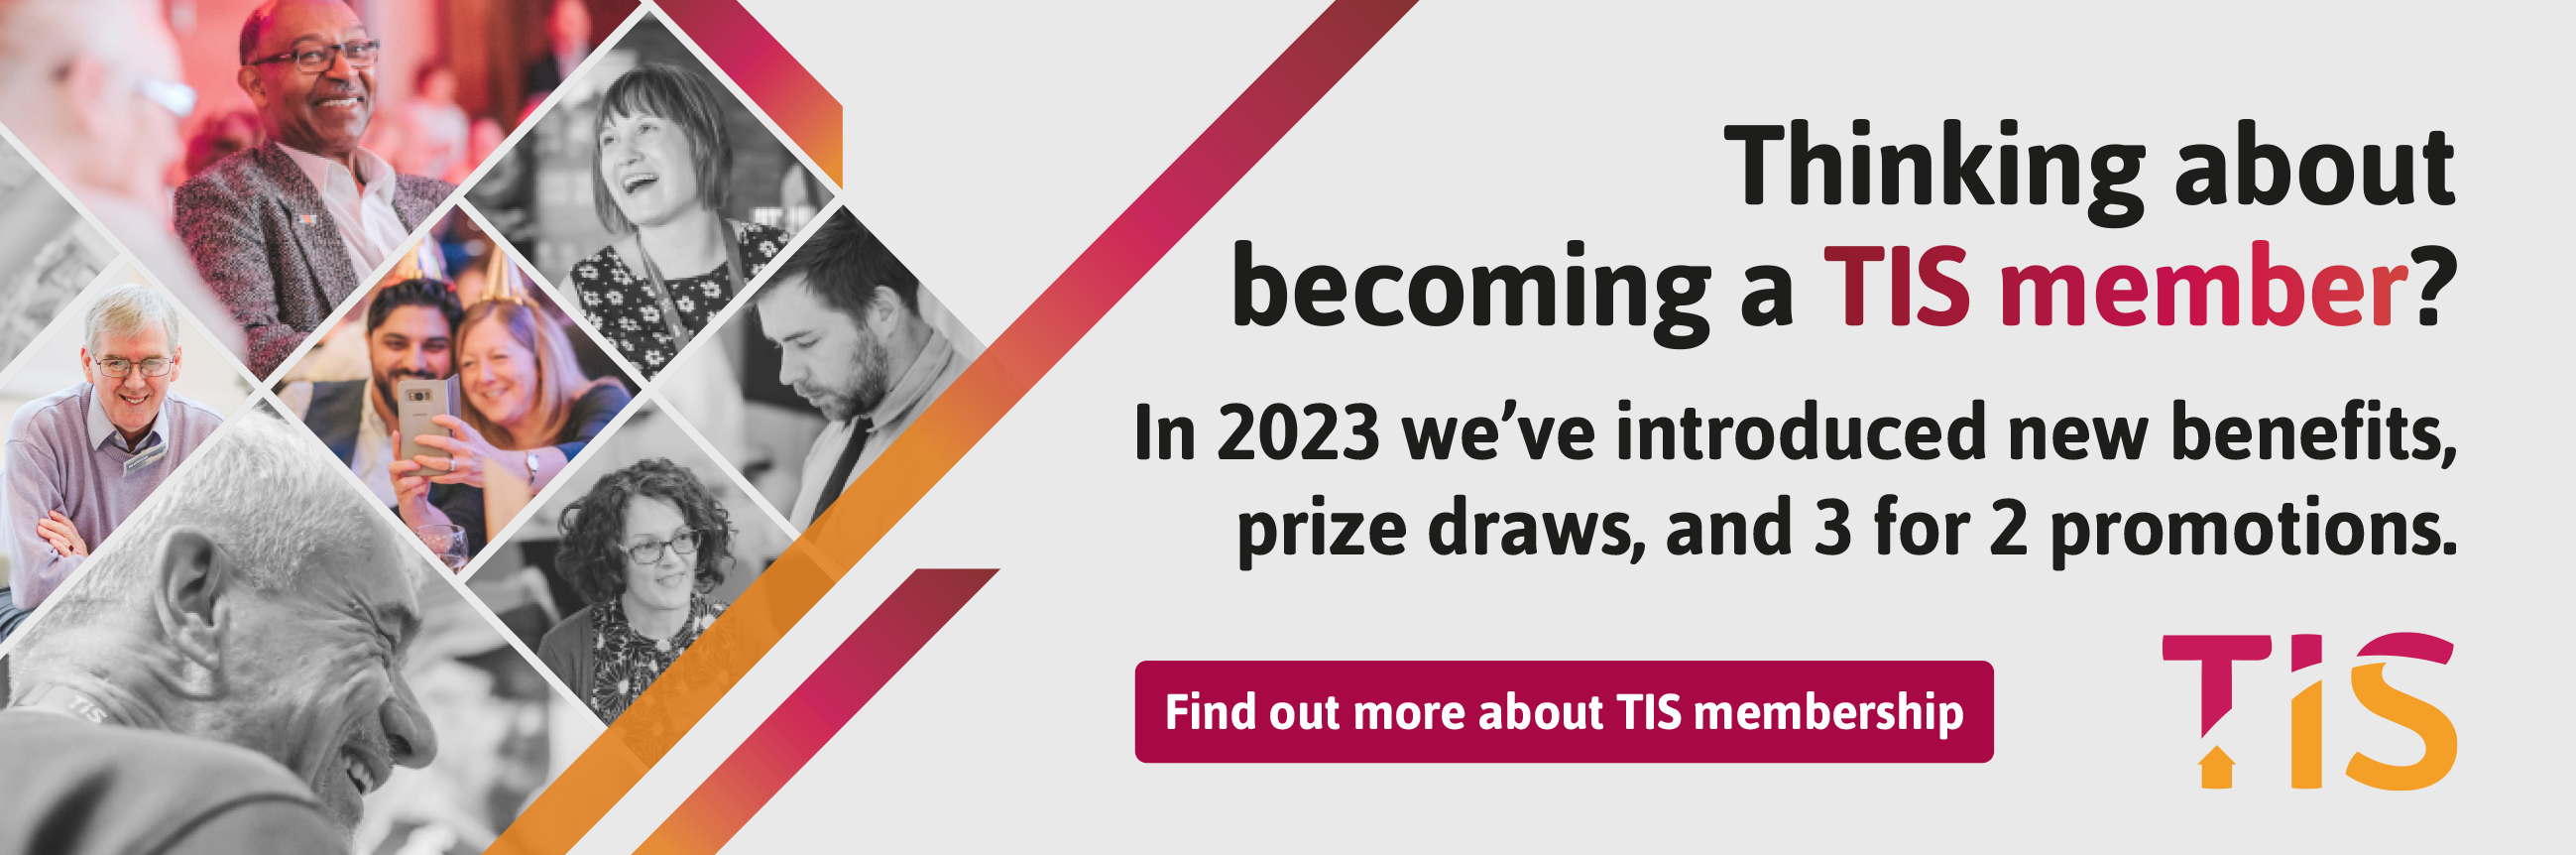 TIS enters 2023 by unveiling new member benefits, prize draws, and 3 for 2 promotions